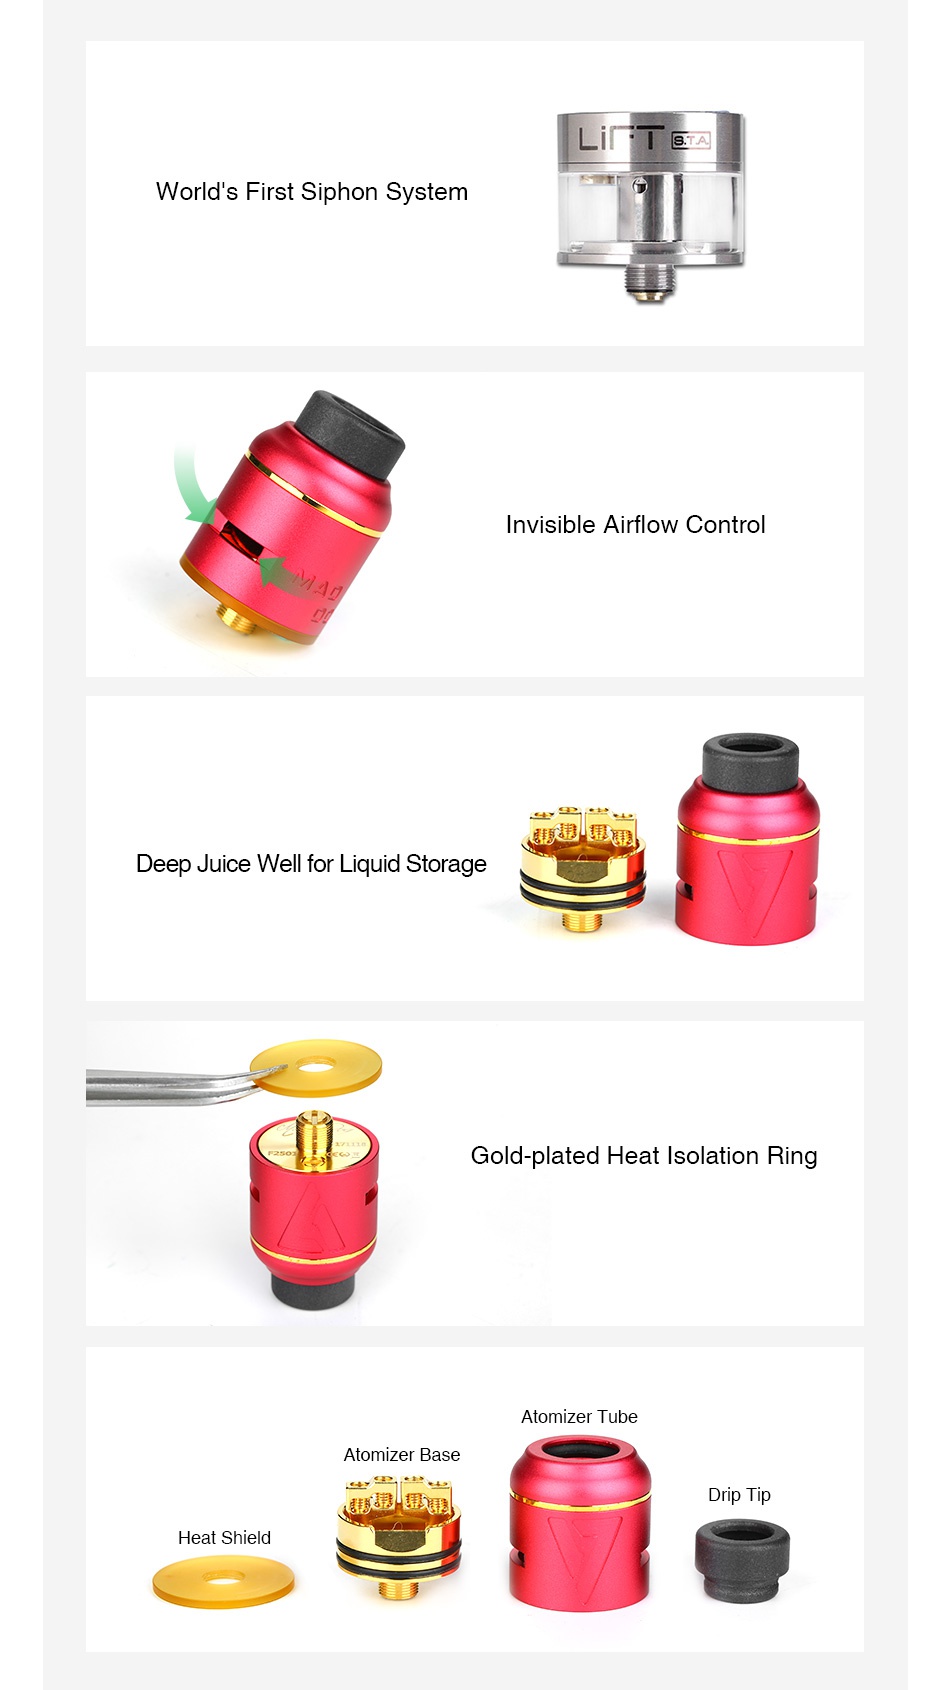 Desire Mad Dog RDA/RDTA V2 Worlds first siphon System Invisible airflow contro Deep juice Well for Liquid Storage GUy Gold plated Heat Isolation Ring Atomizer tube Atomizer base 1 Drip t Heat shield